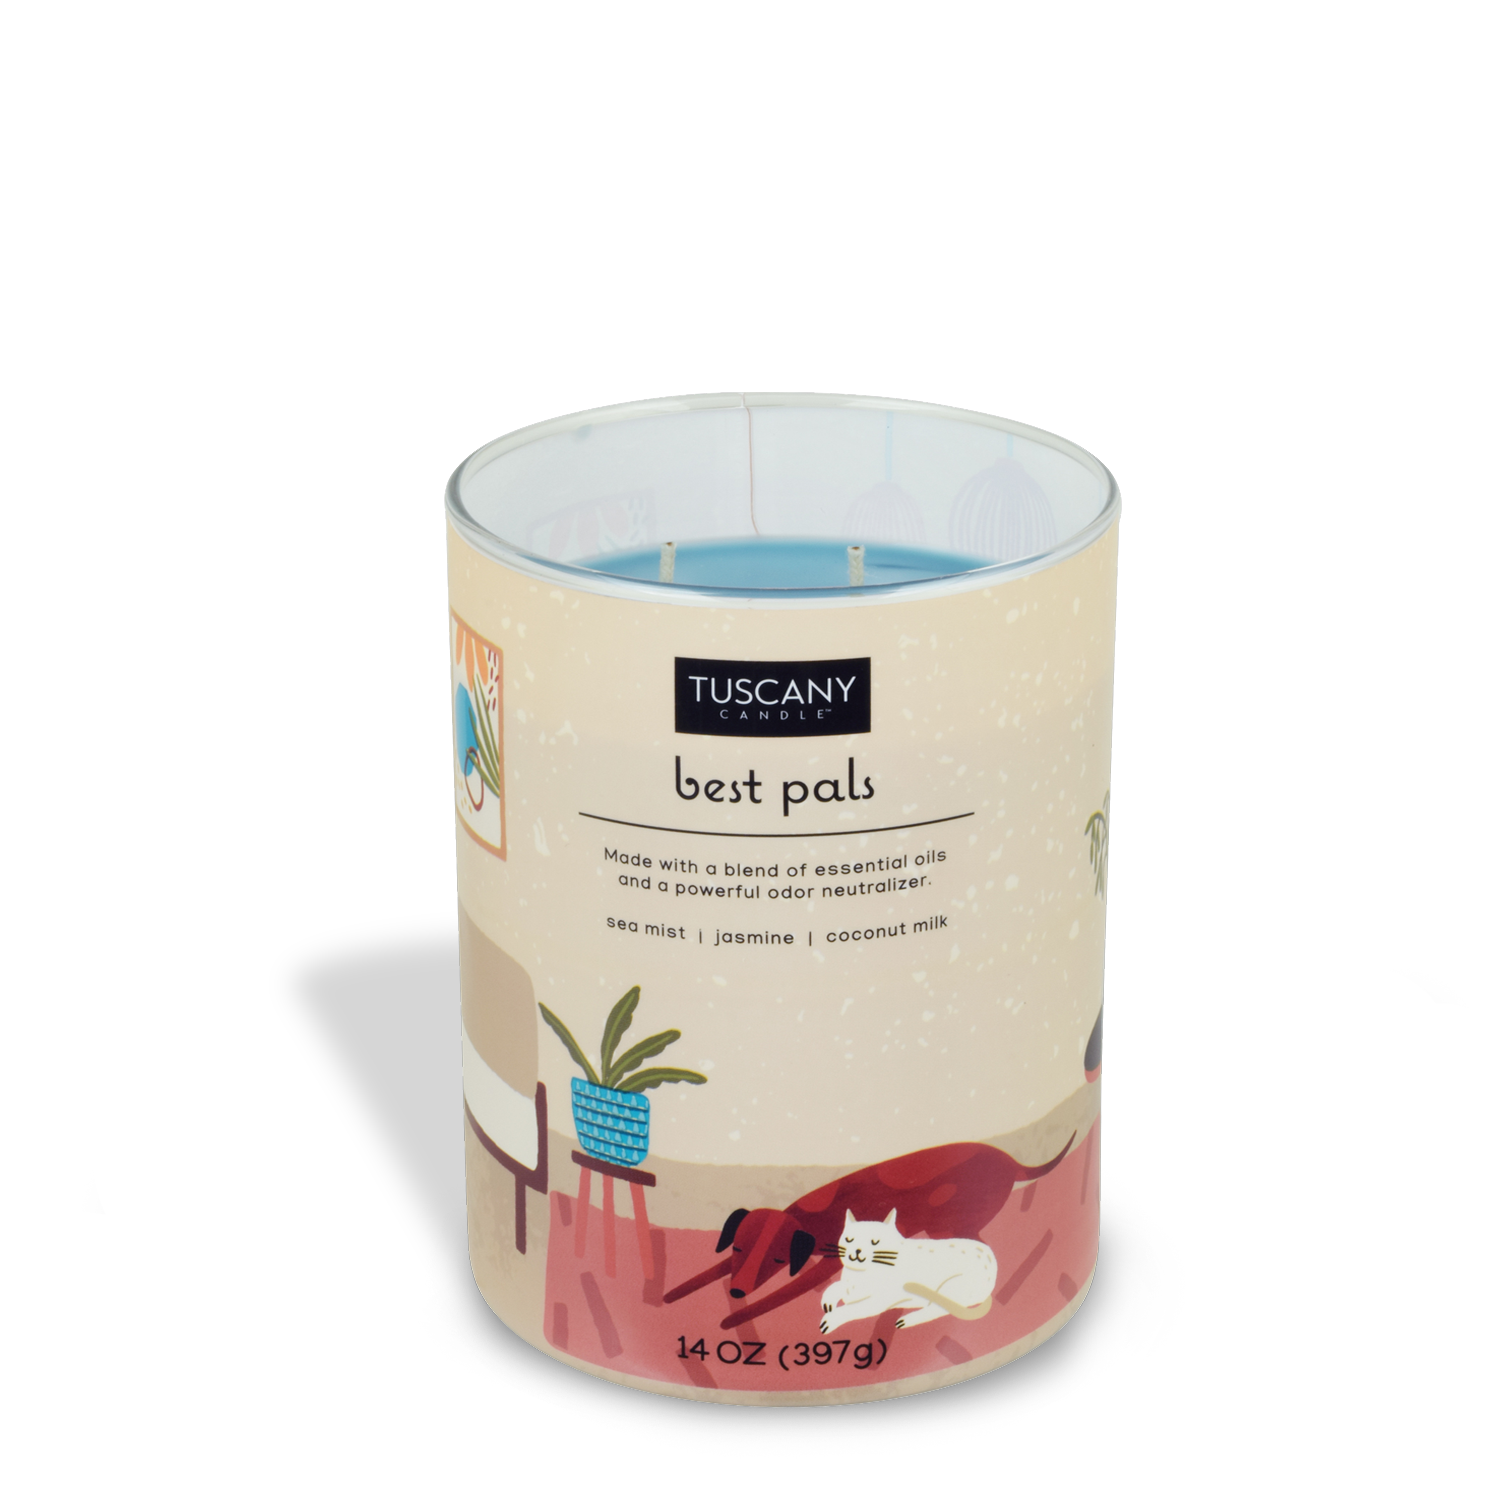 A Best Pals scented jar candle (14 oz) from the Tuscany Candle brand with an image of a cat on it.